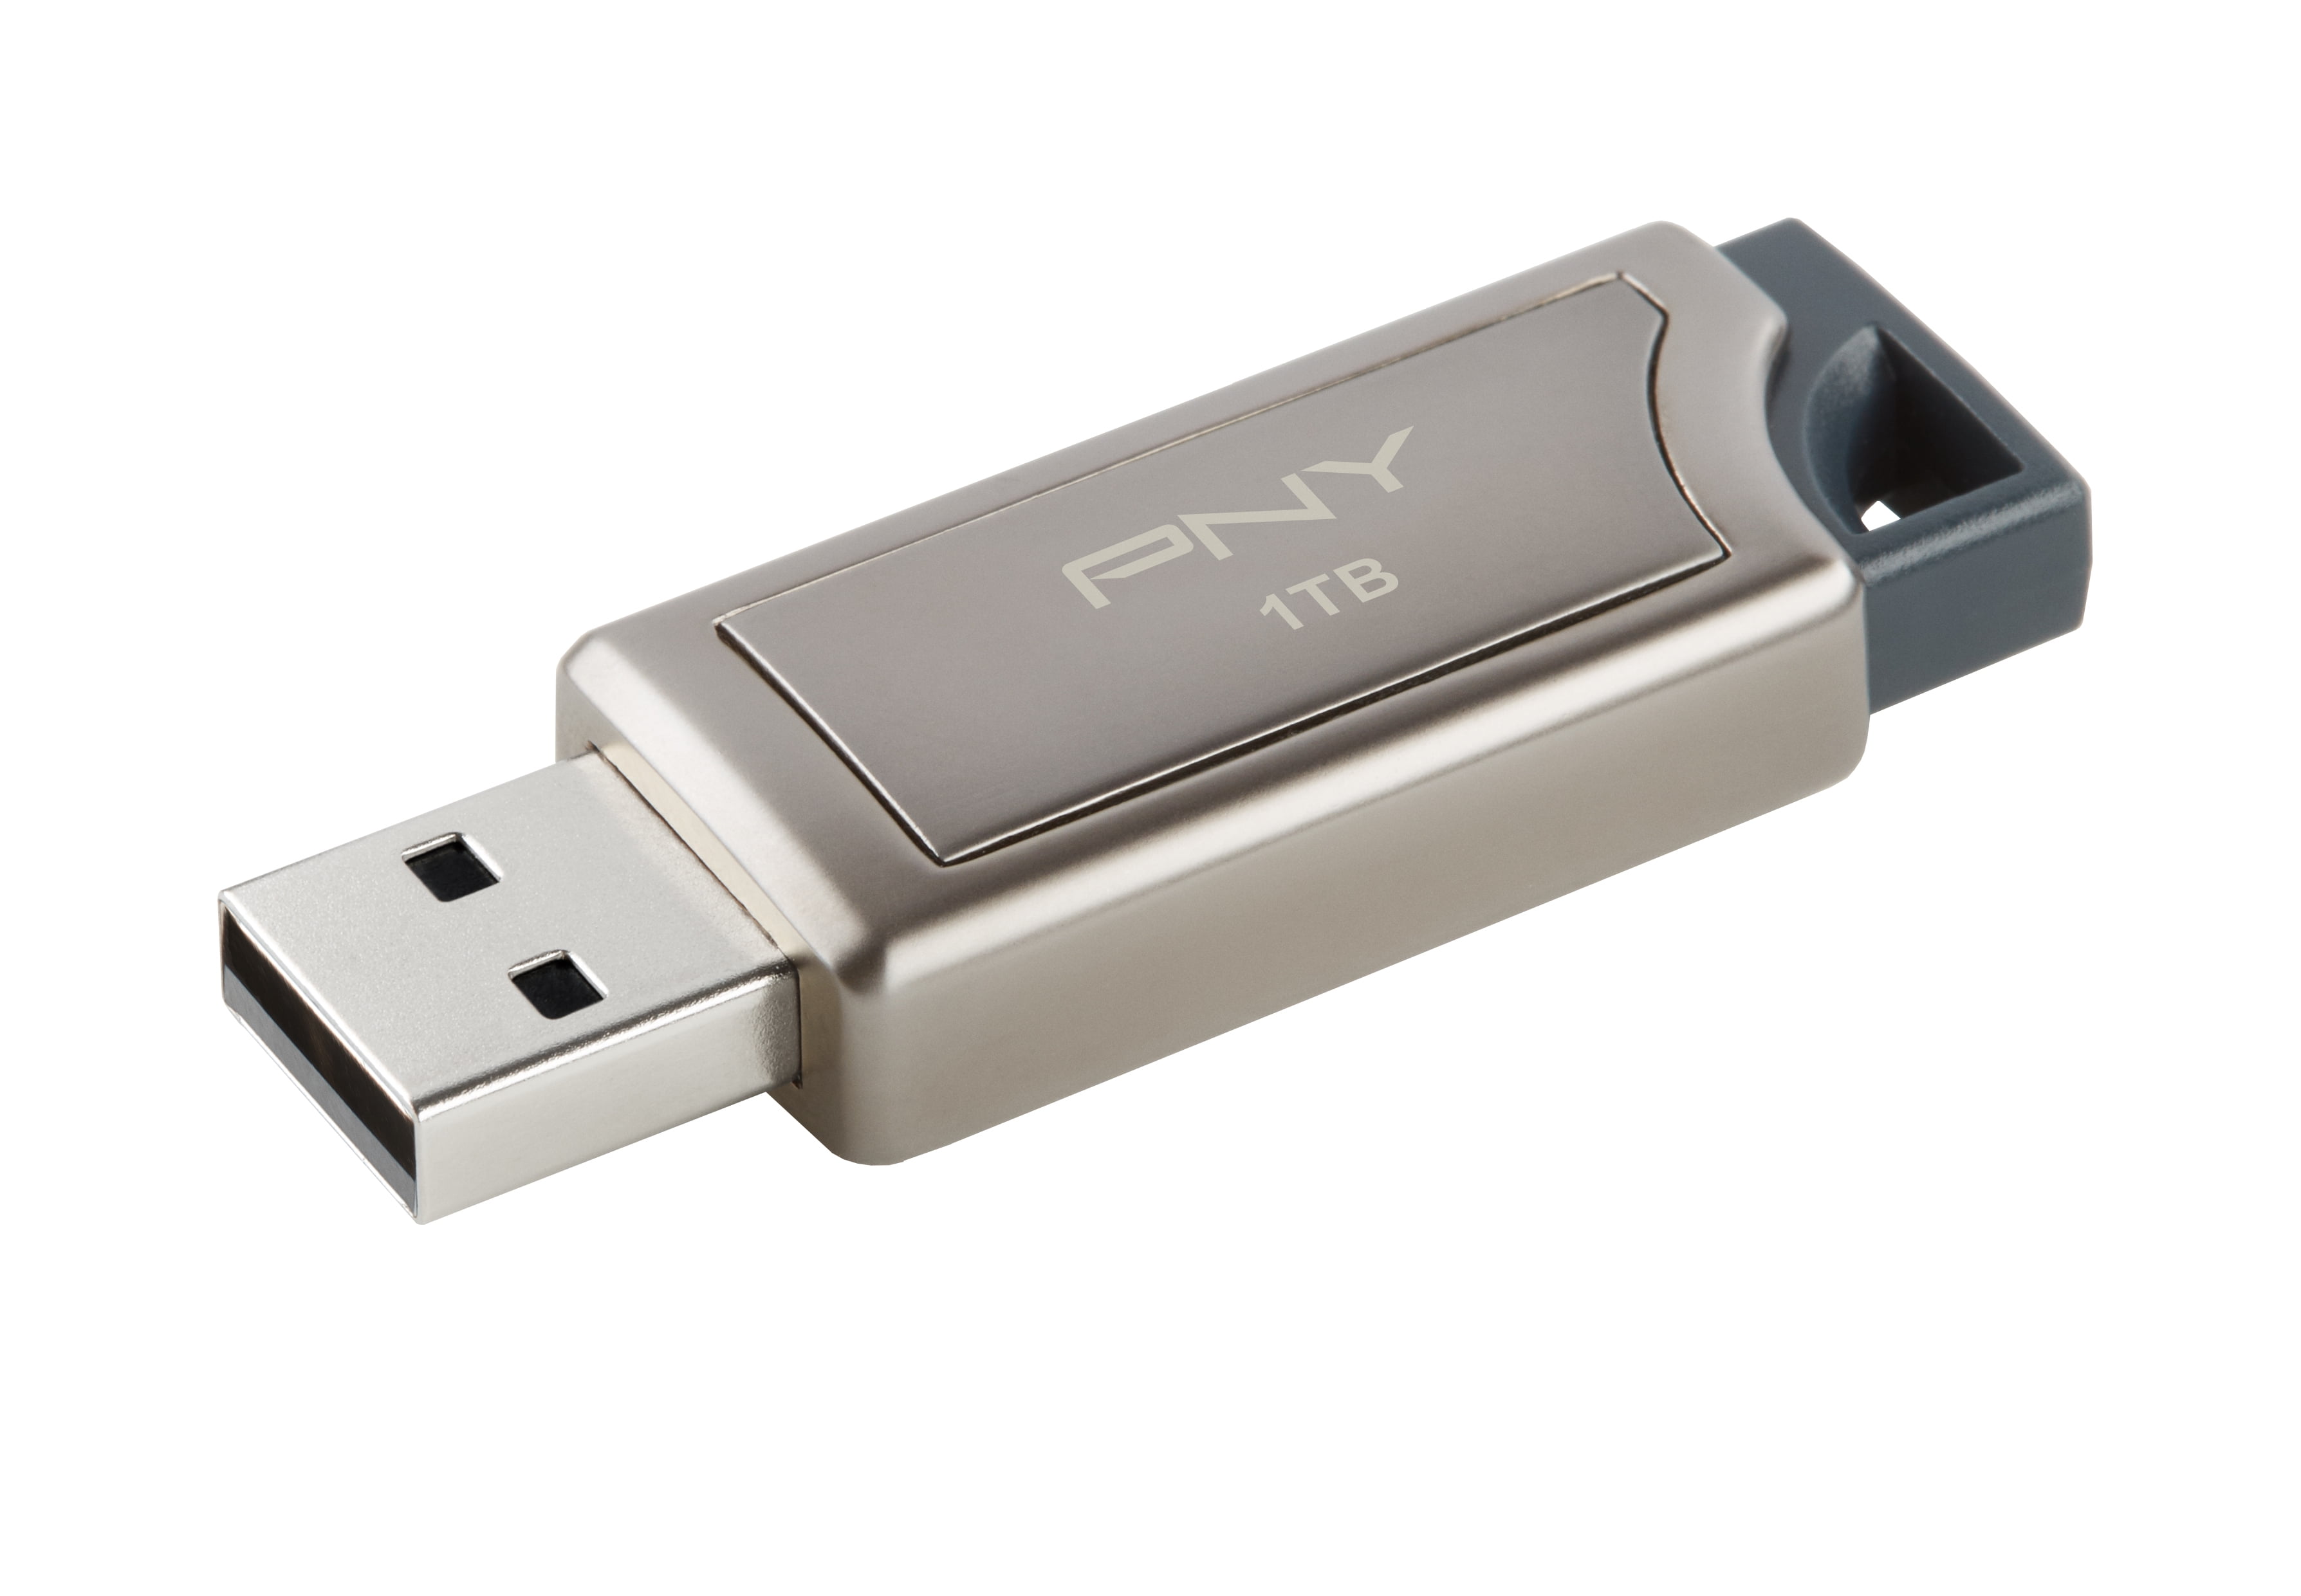 Portable 20MB/S Writing and 10MB/S Reading Speed & 6MB/S Transmission,USB2.0 Flash Drive Storage Device Read Data Flash Driver,Plug and Play 32GB U Disk